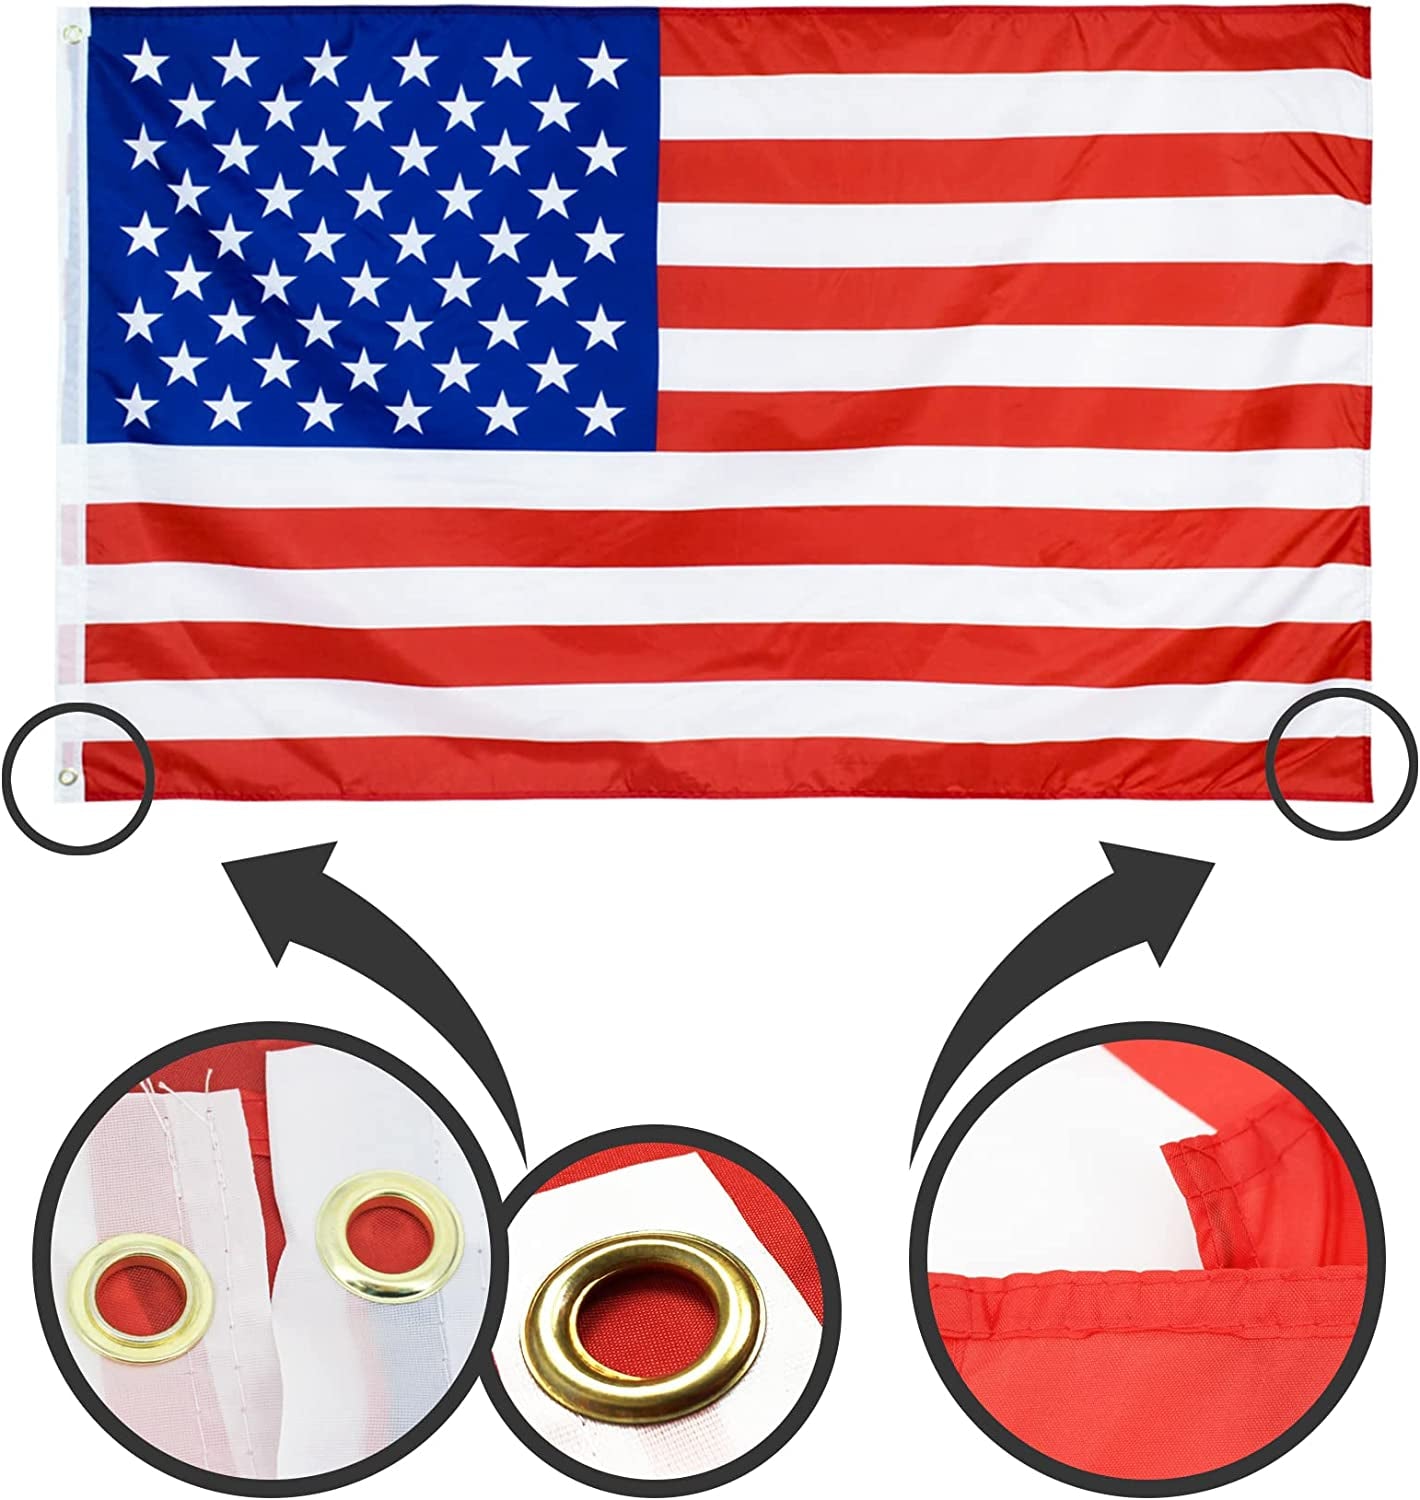 2 Pcs US American Flag 3x5 Foot | Flag of USA | Weatherproof US Flags with Brass Grommets | Polyester USA National Flag for Outdoor Garden 2022 World Cup Party Celebration Decorations